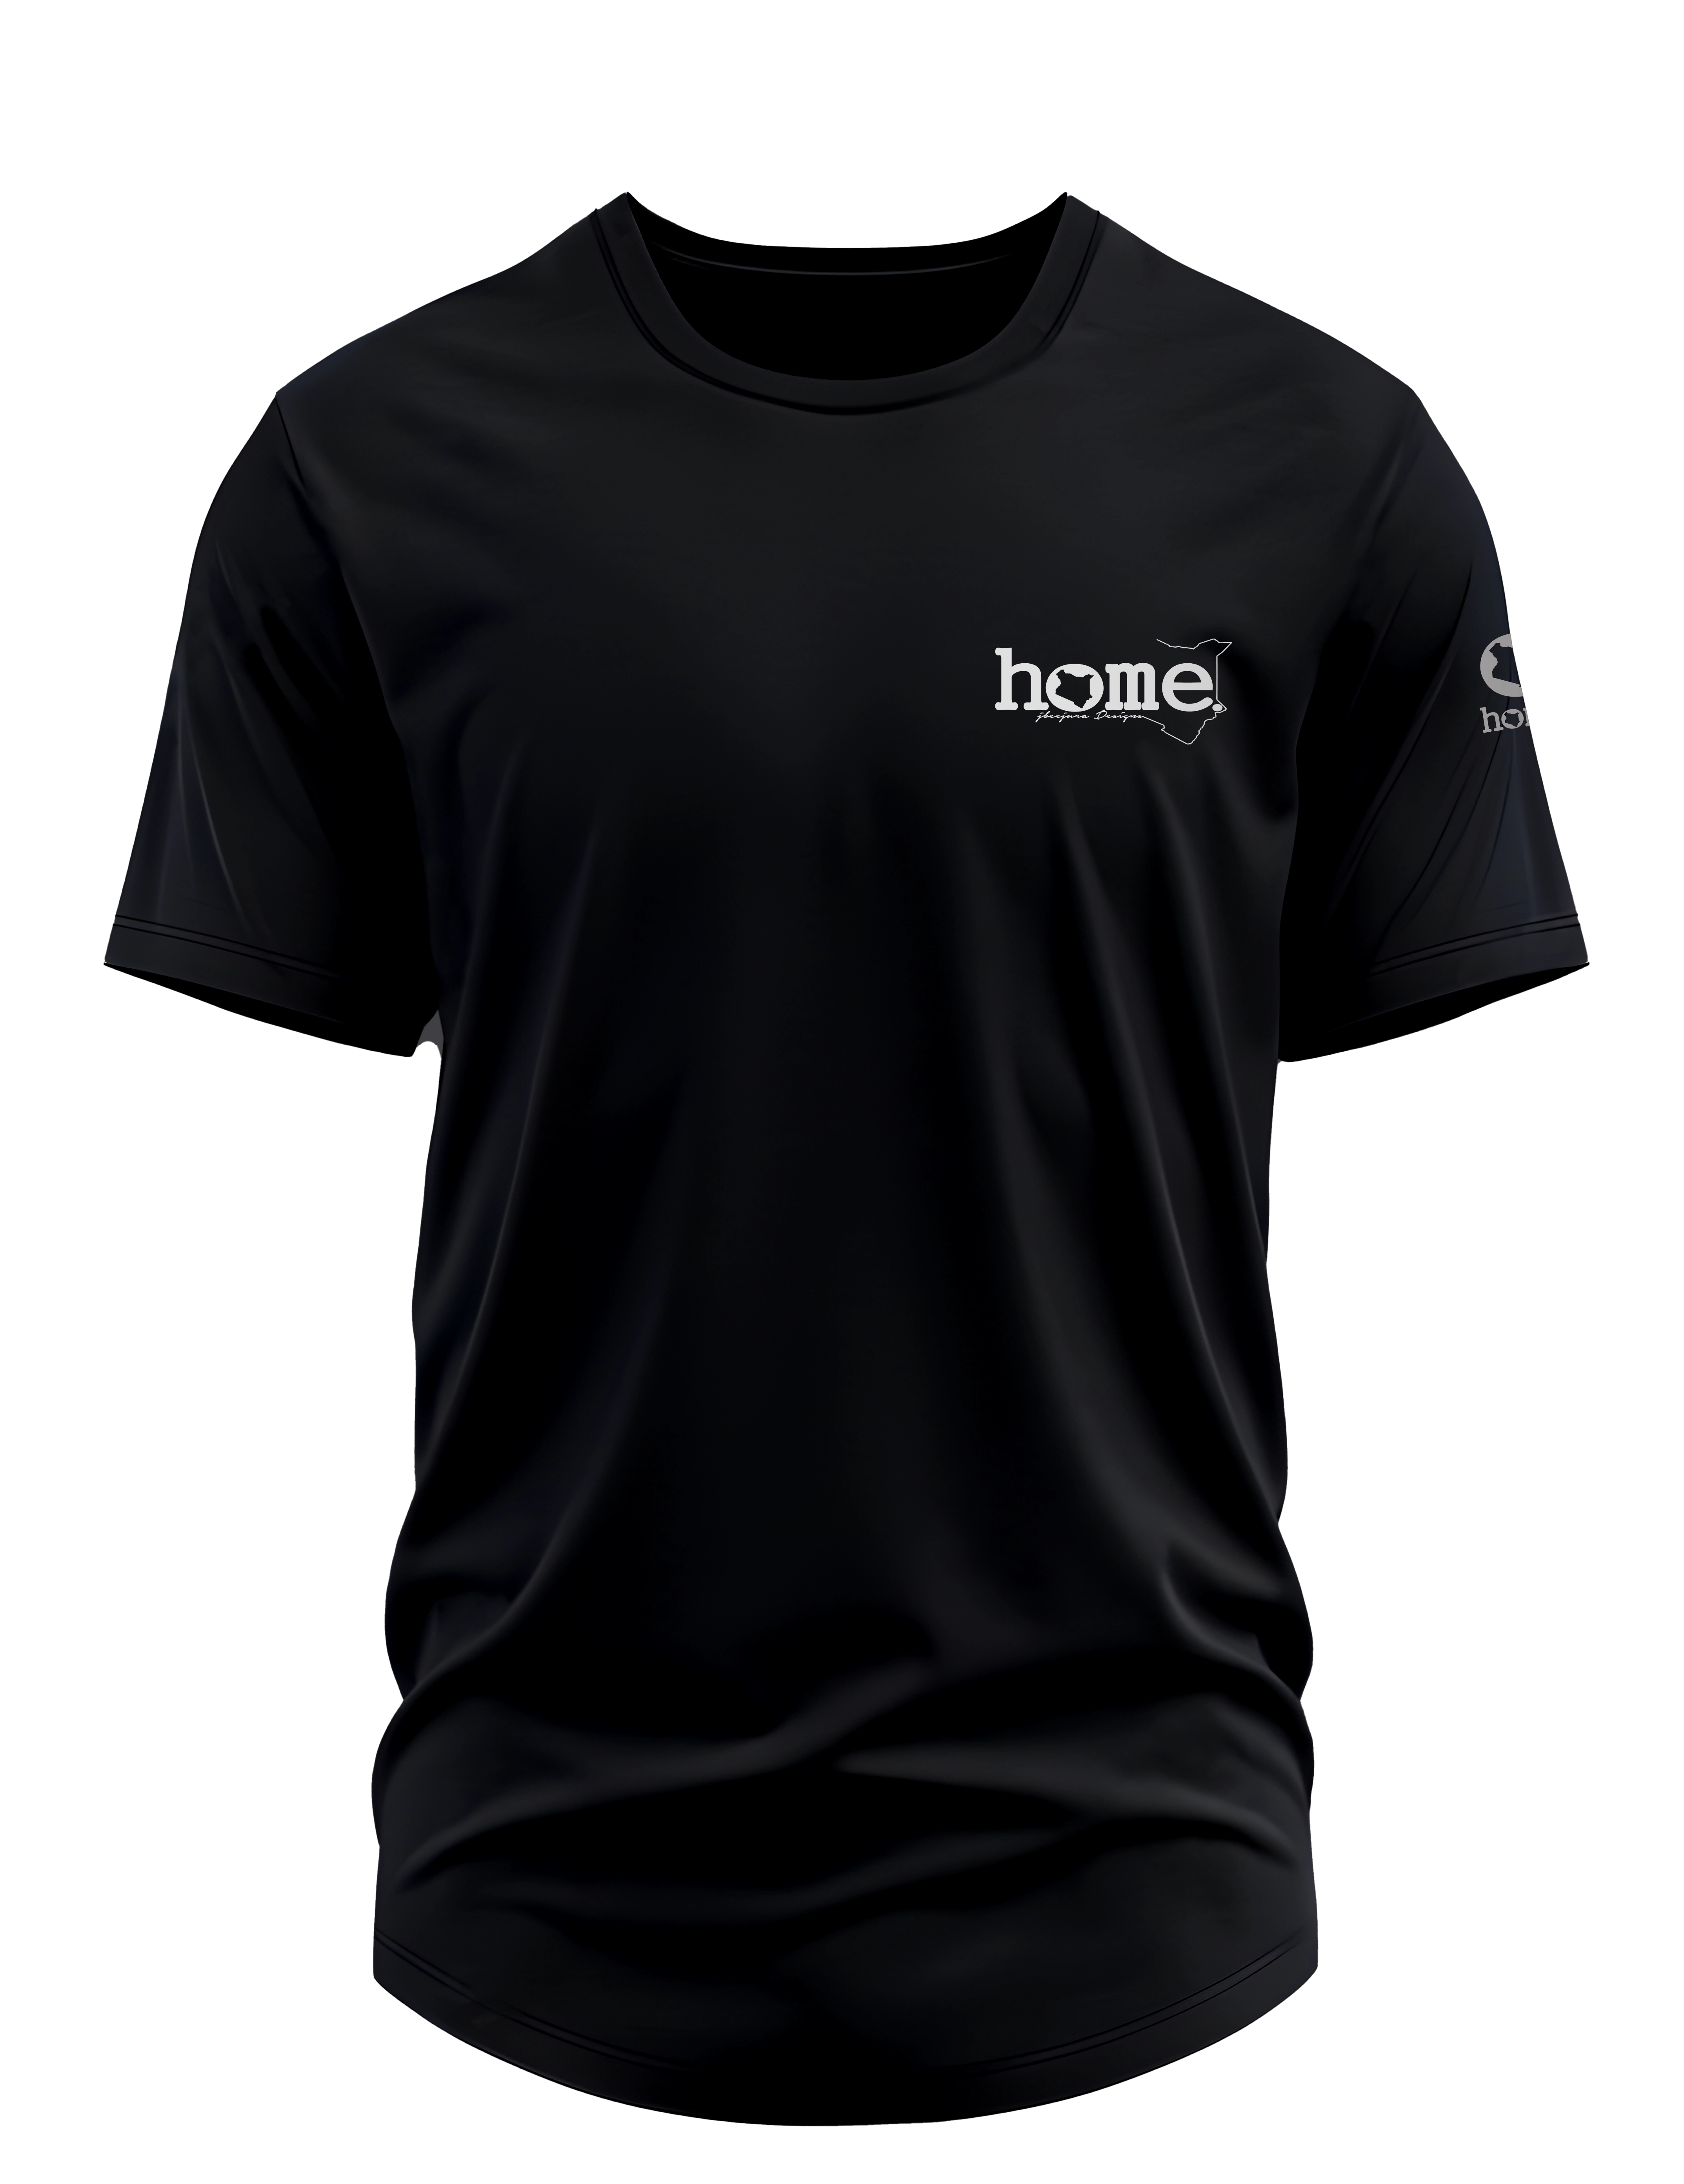 home_254 SHORT-SLEEVED BLACK CURVED HEM T-SHIRT WITH A SILVER TAG PRINT – CLASSIC MAN COLLECTION